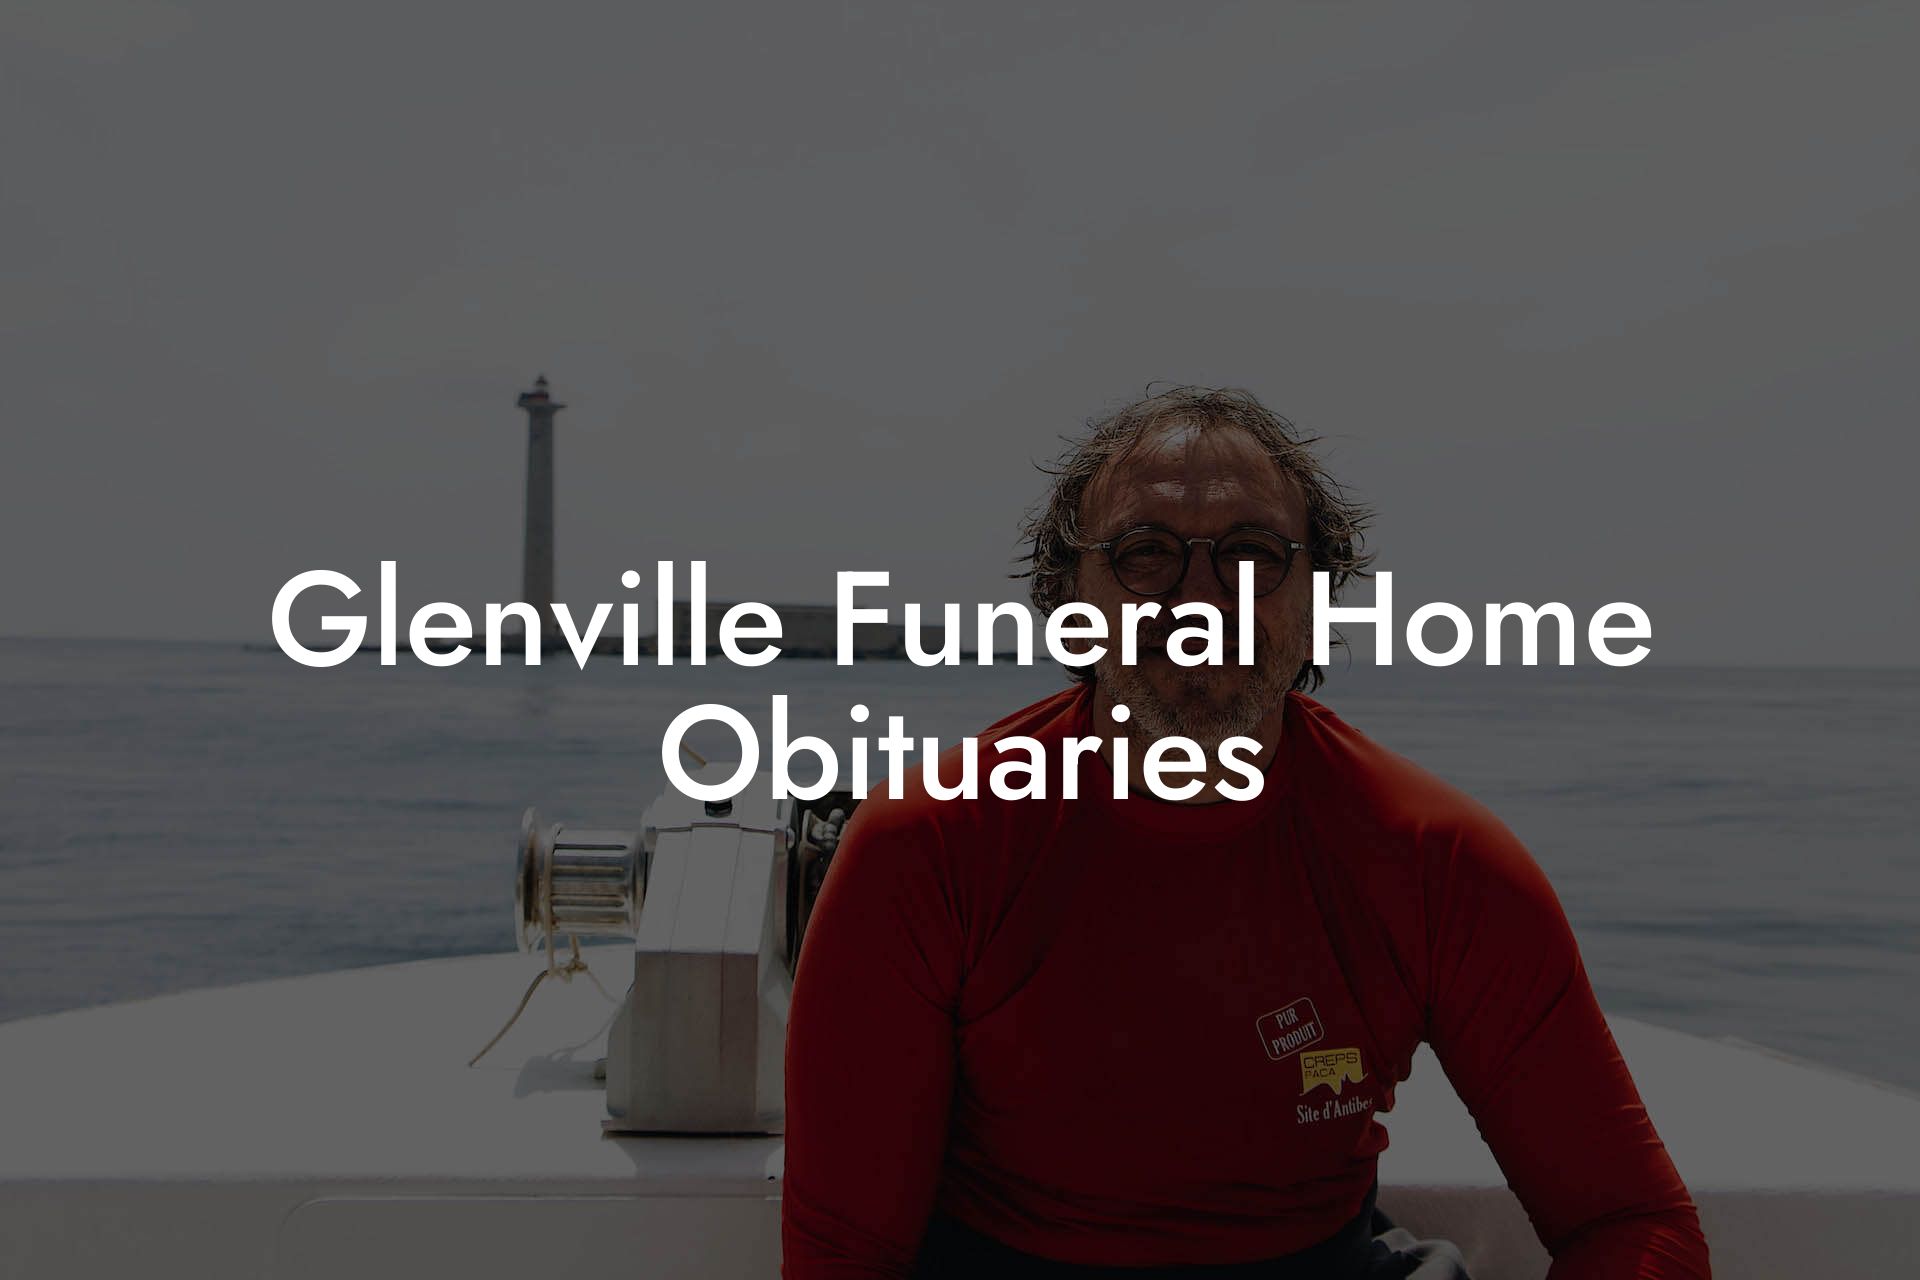 Glenville Funeral Home Obituaries